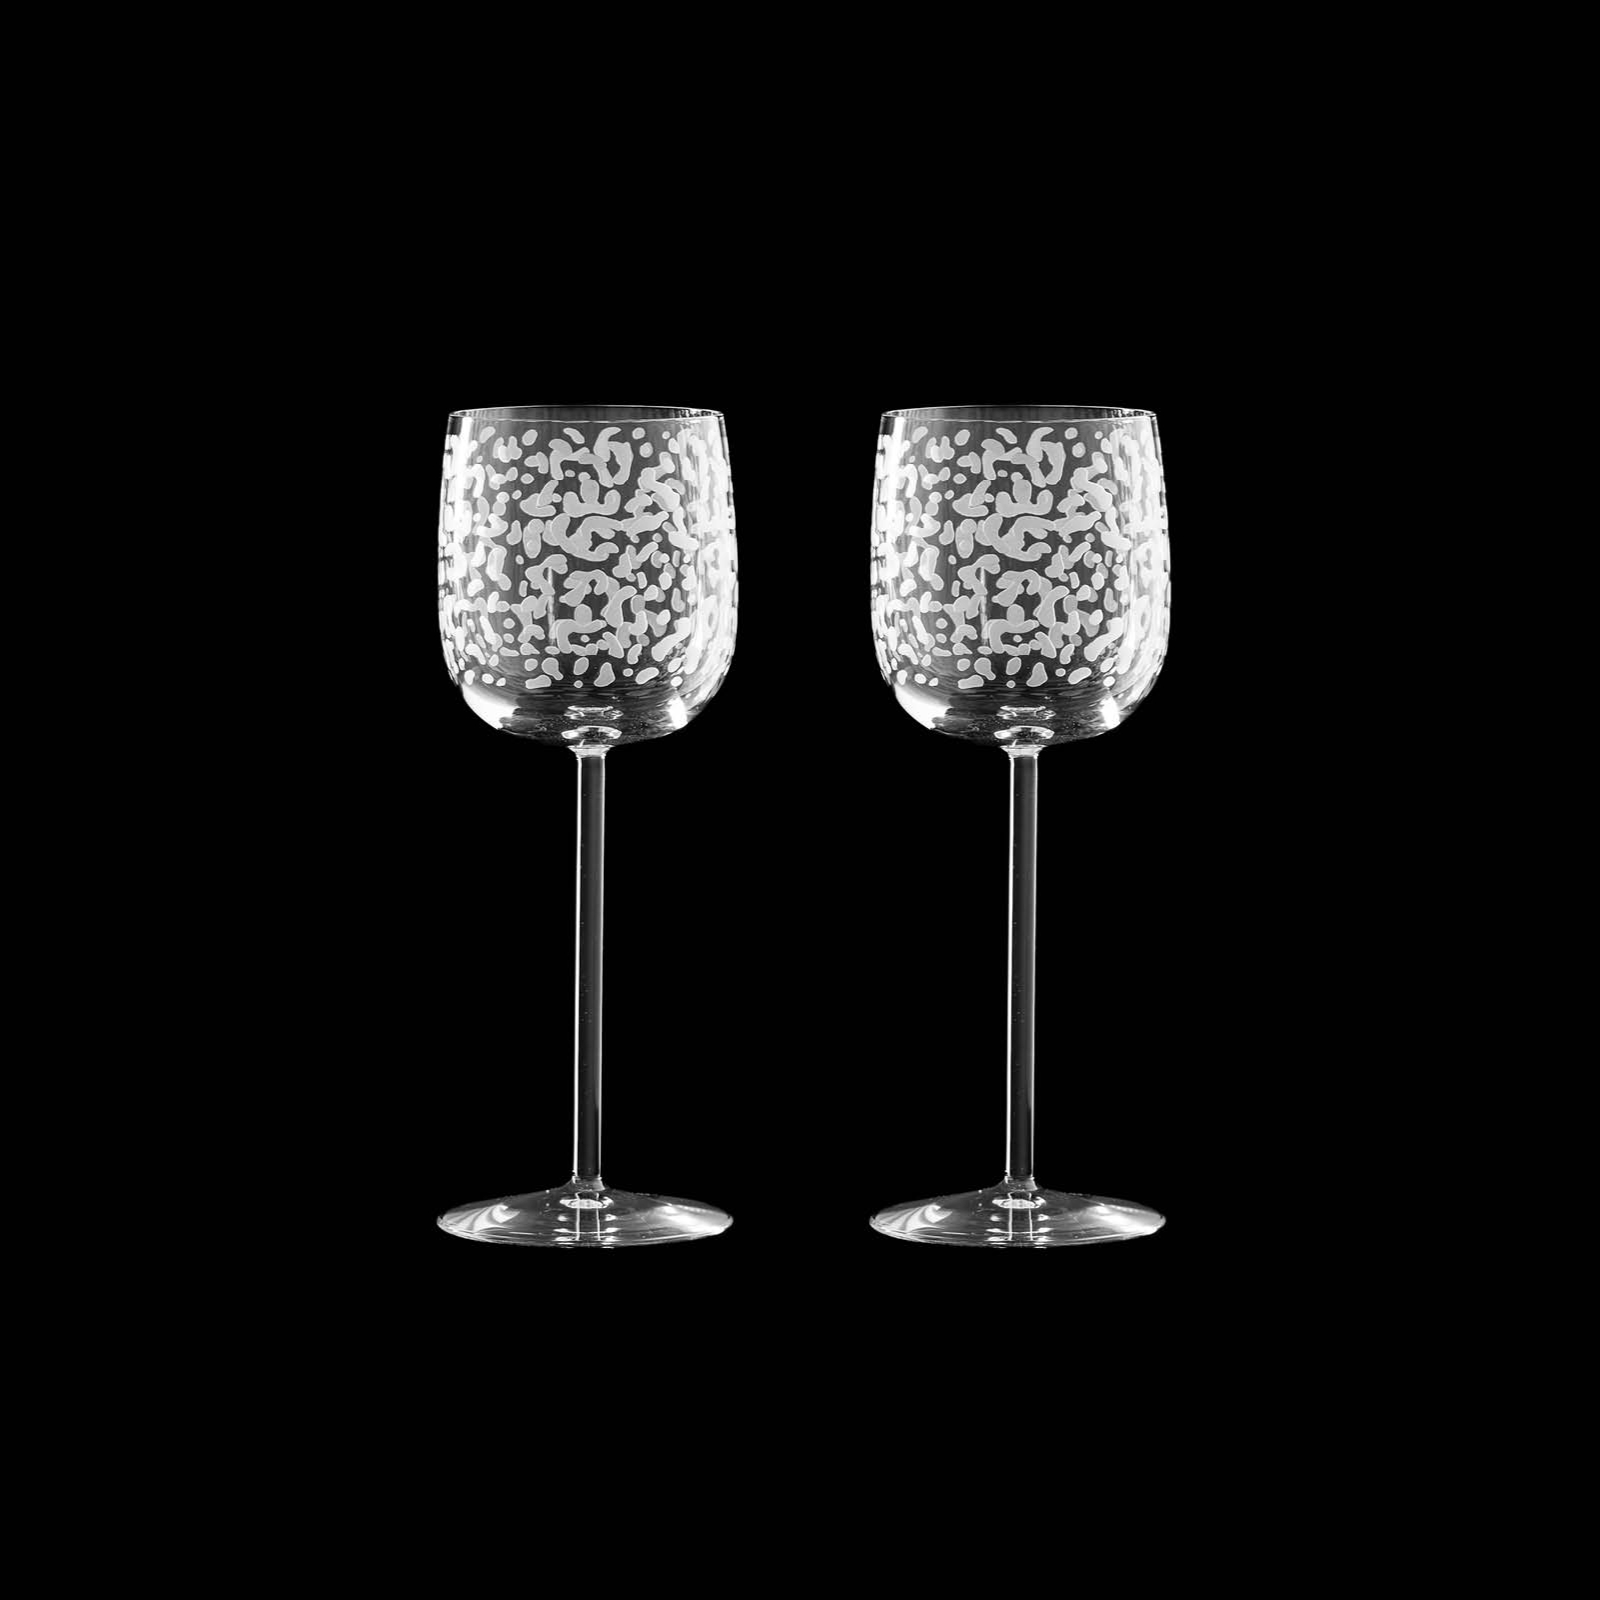 Salviati stemmed glass with "Raindrops" cold-worked decoration. Set of 2.